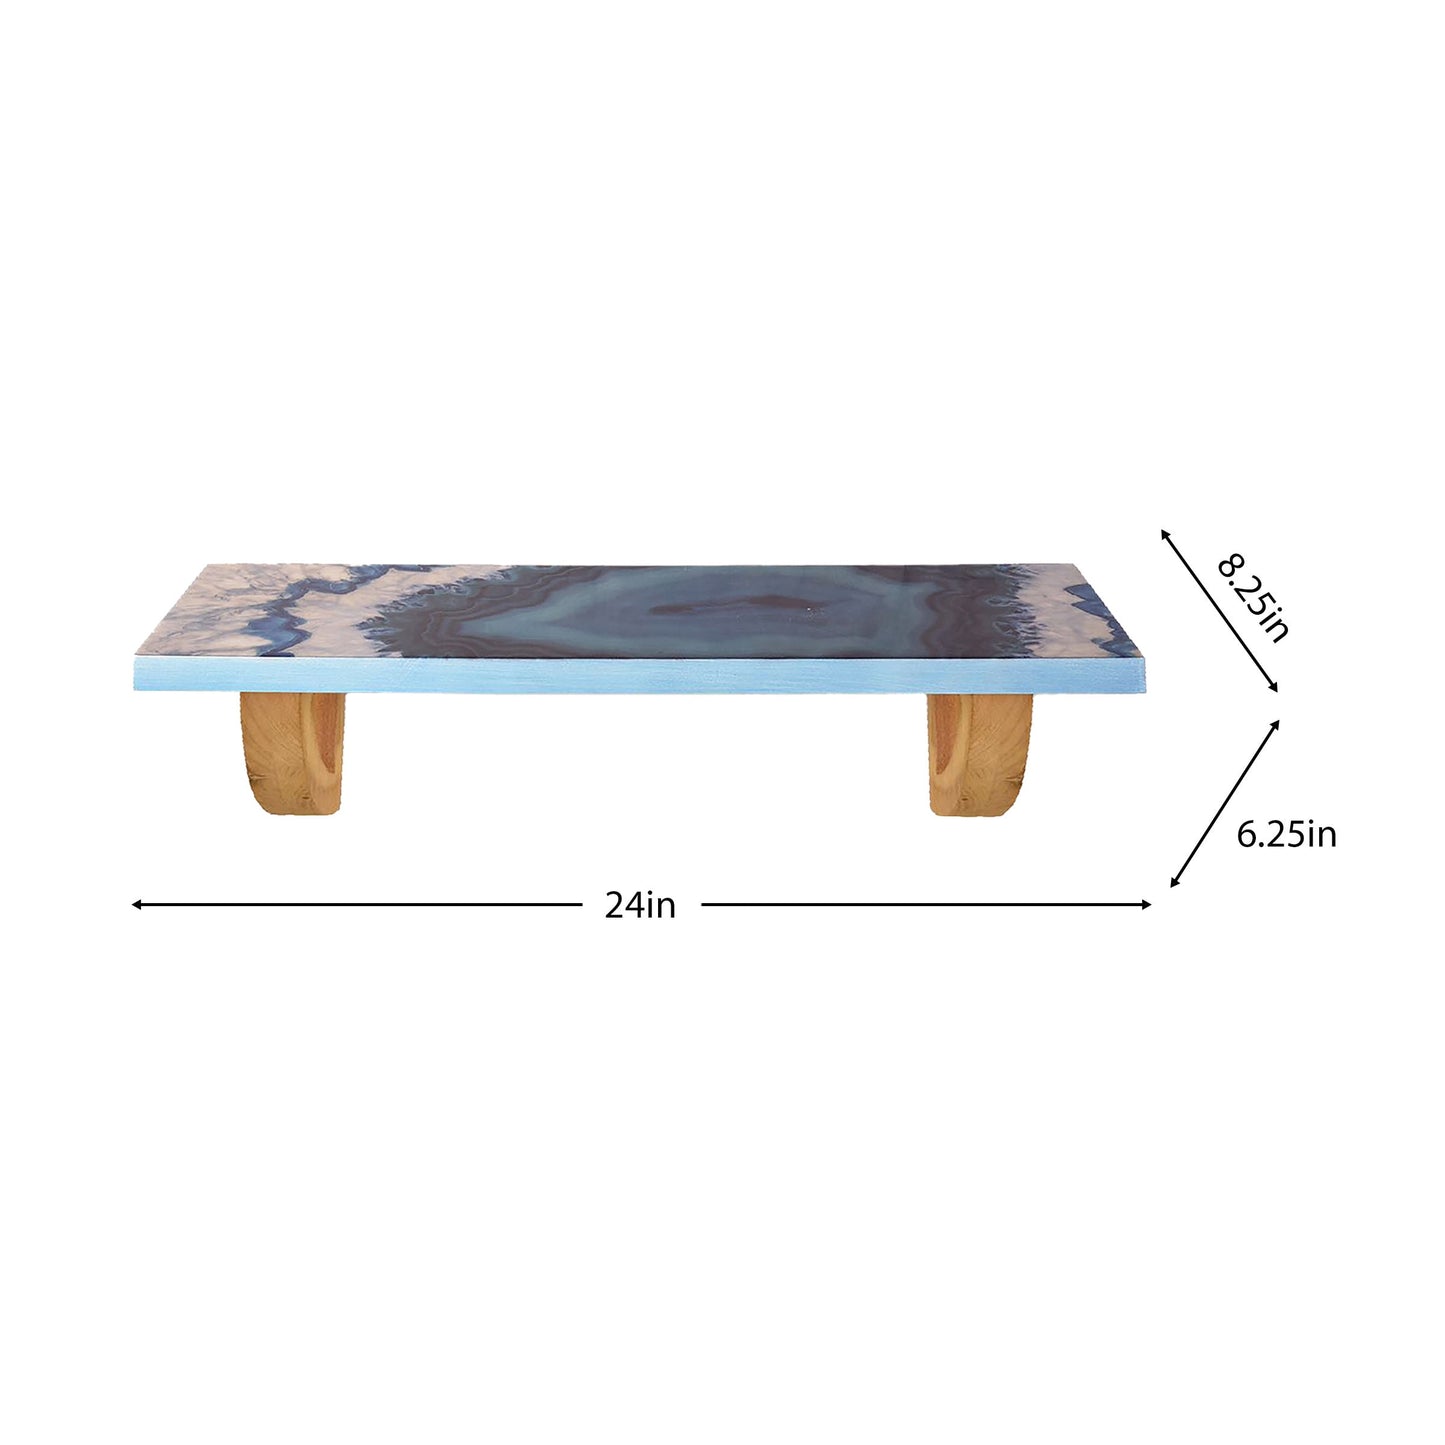 Agate 36" Wooden Wall Shelf, Wooden Wall Mounted Shelves for Bedroom, Living Room, Bathroom, Kitchen, Office and More,